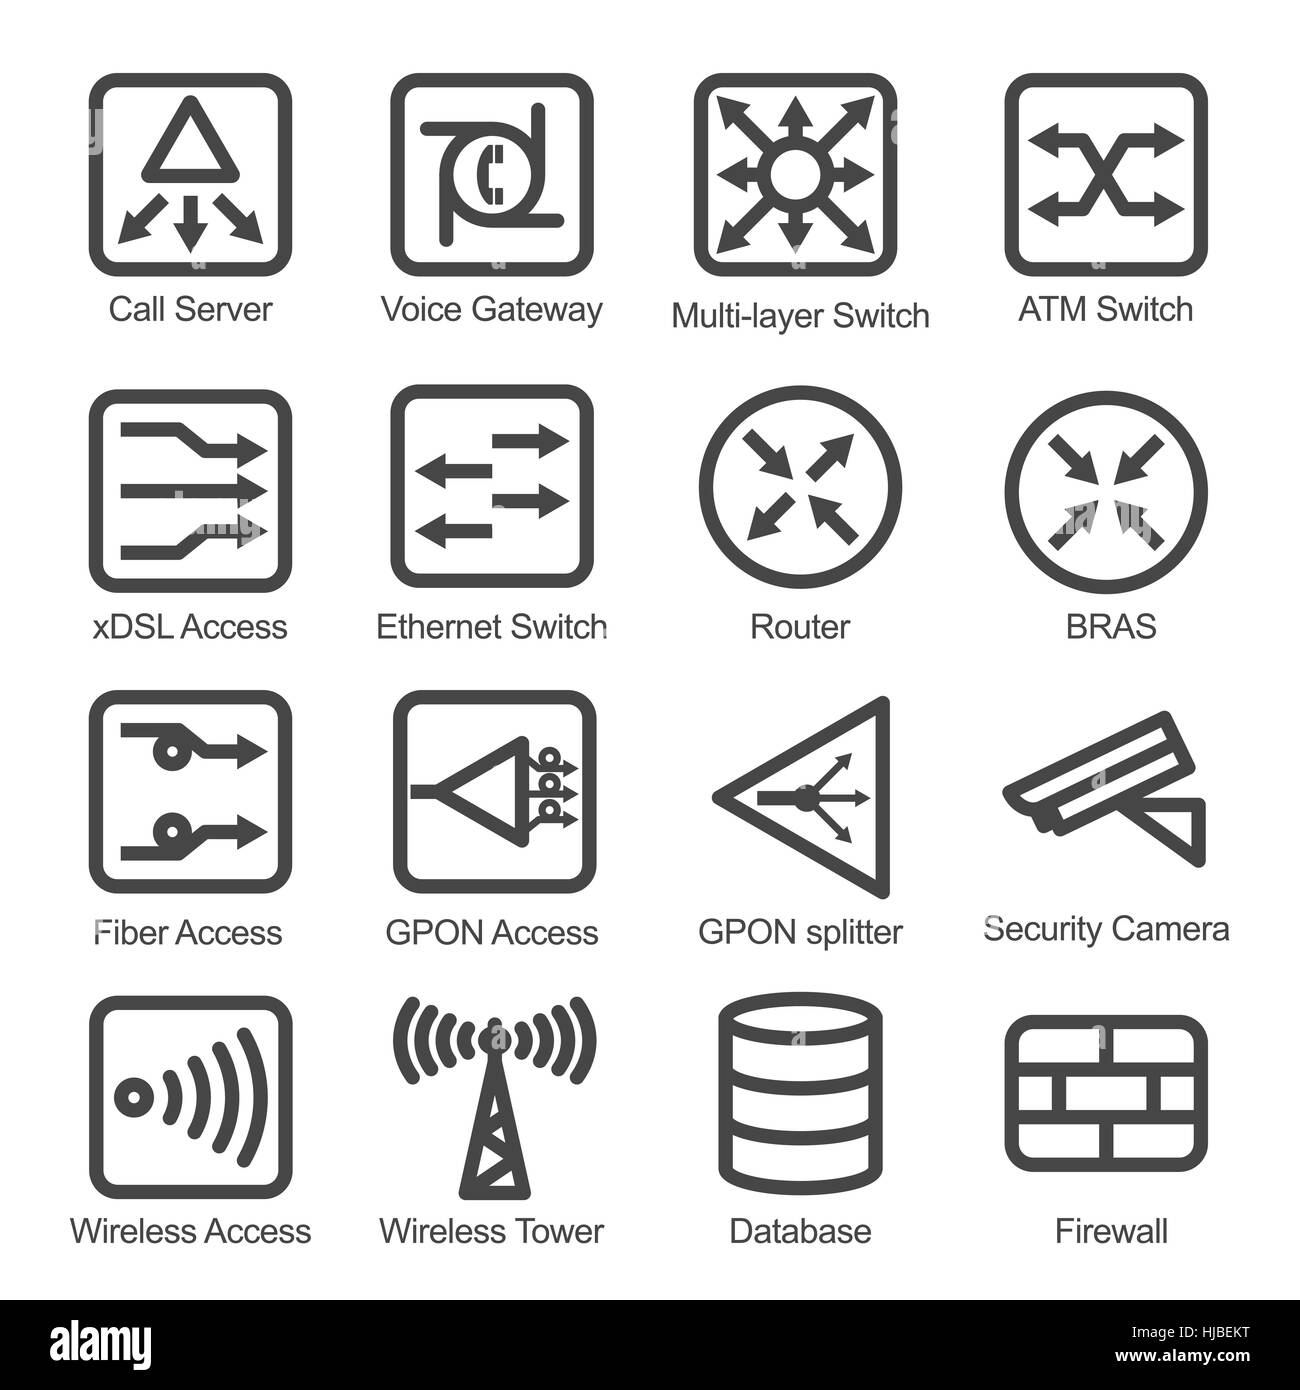 Network Equipment Icon Set - Isolated Vector Illustration. Simplified line design. Black icons collection on white bacground. Stock Vector